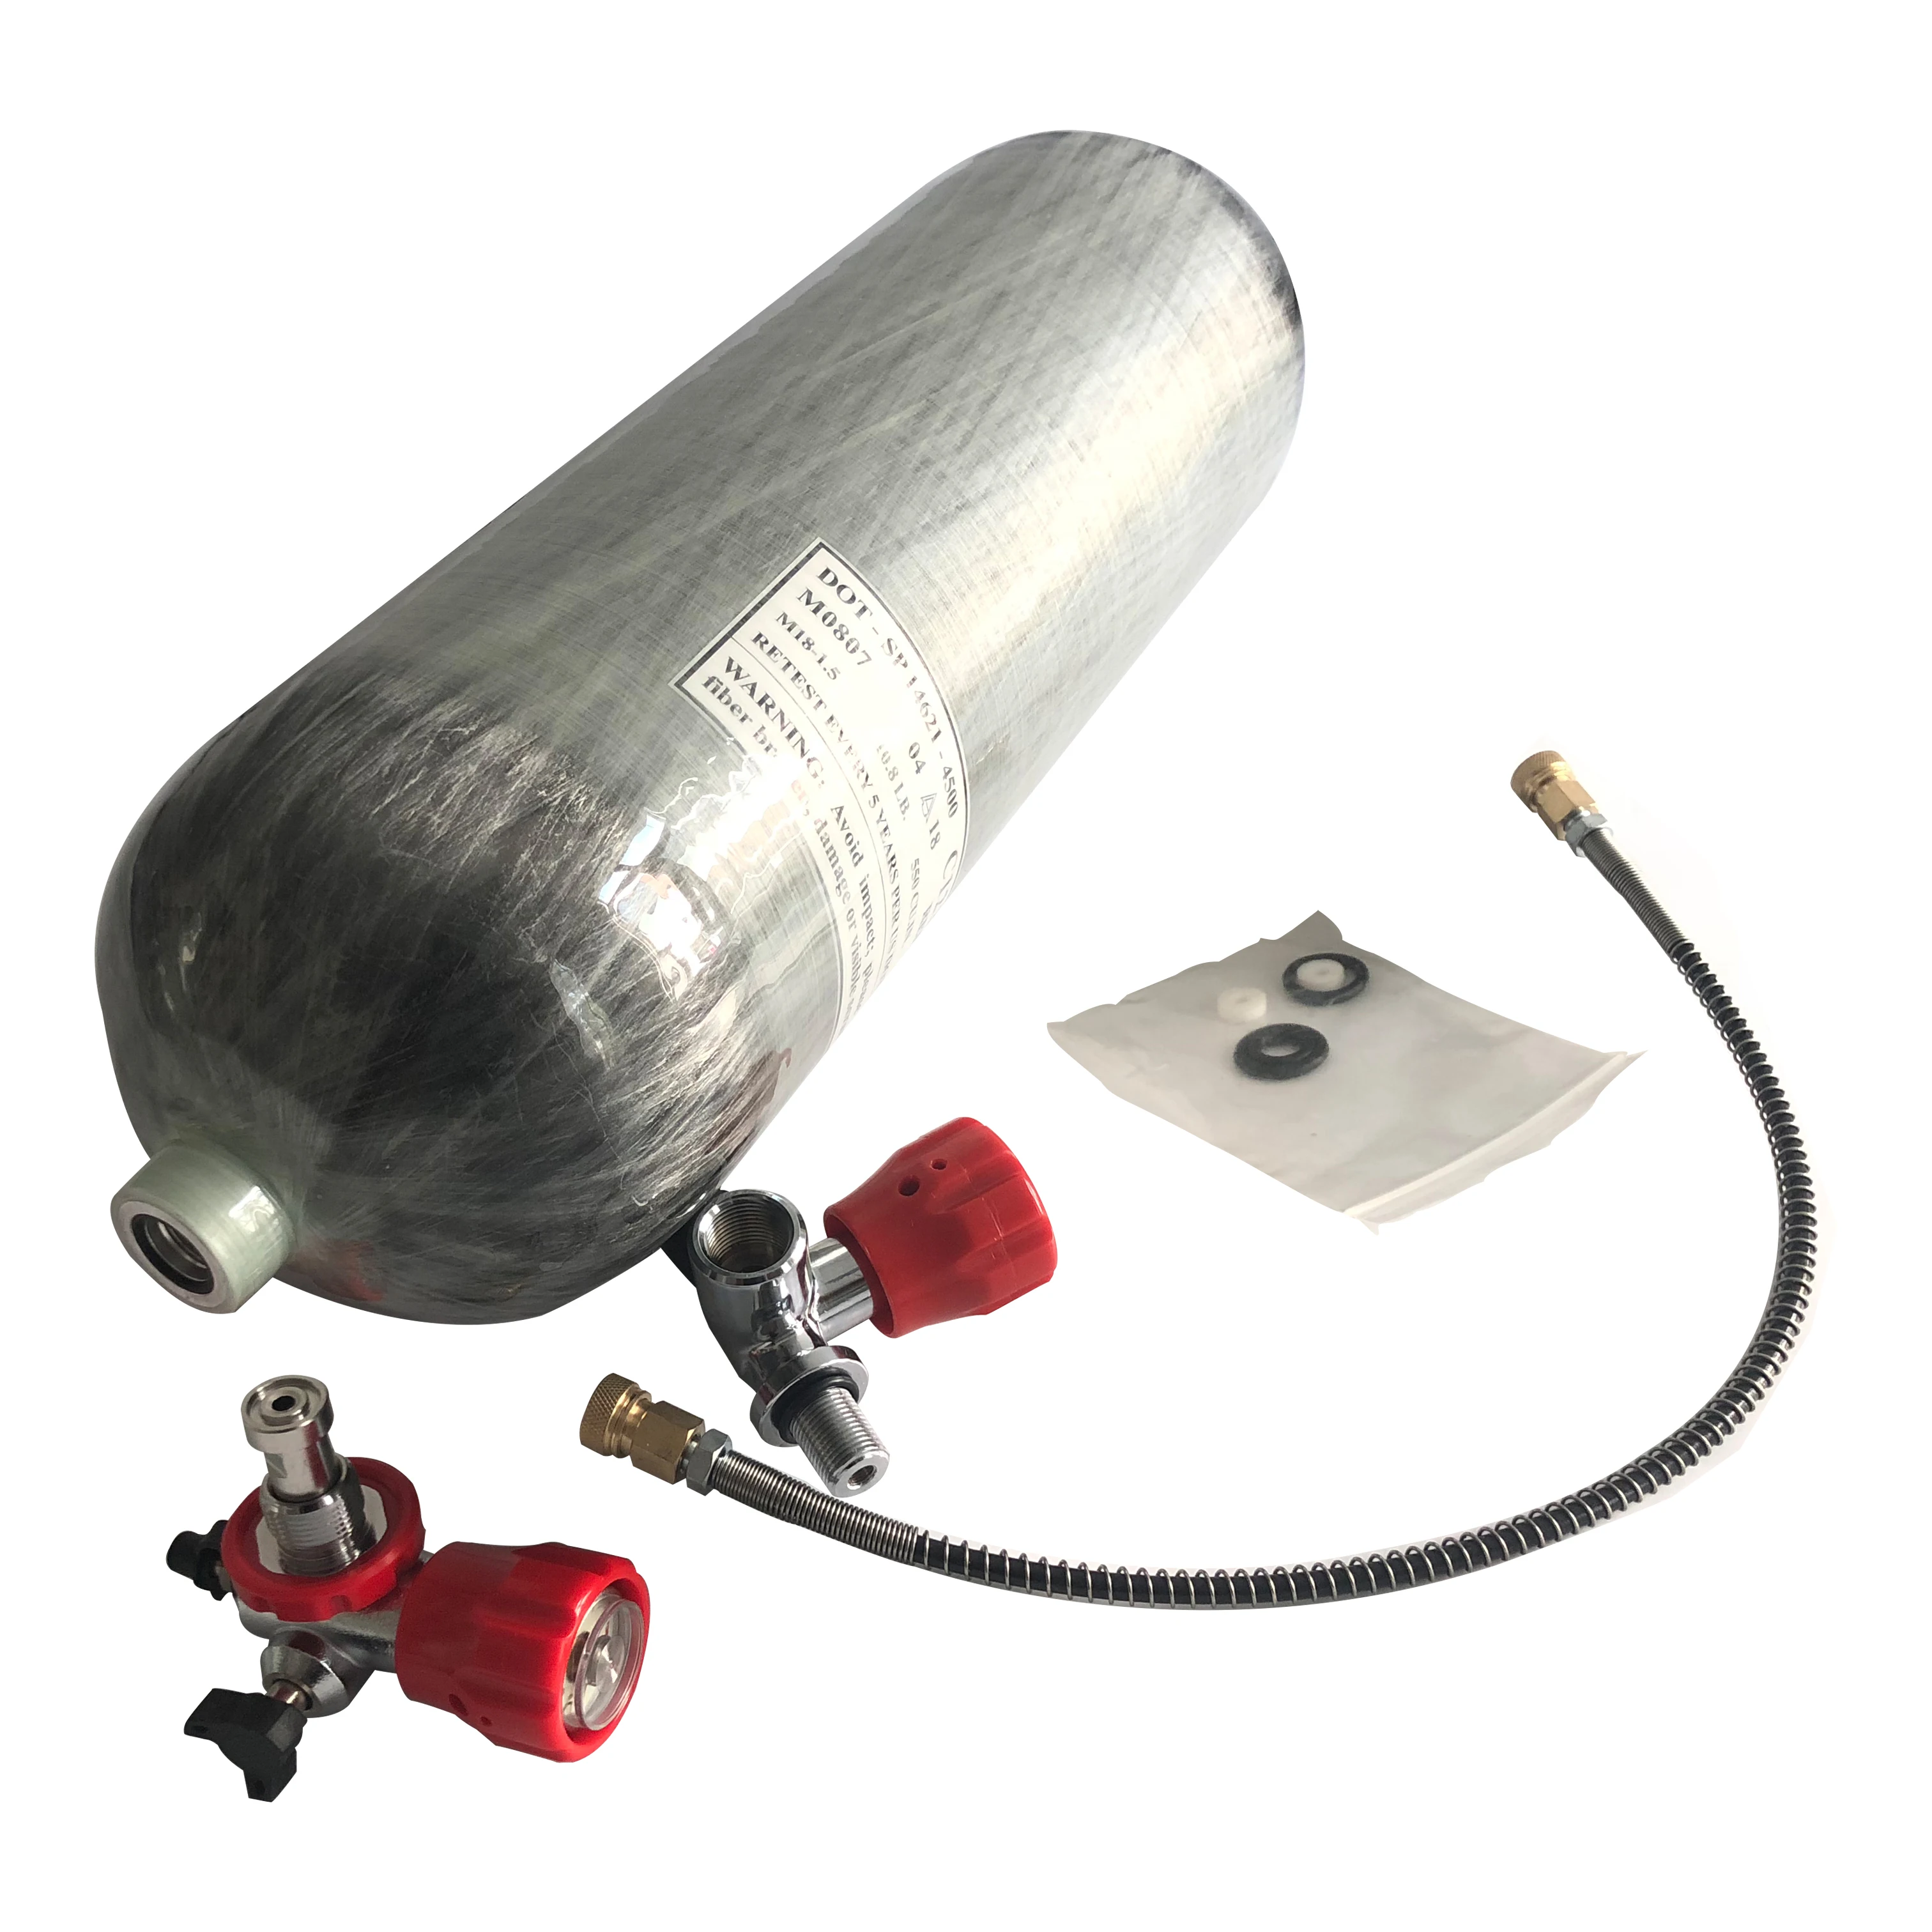 ACECARE 9L DOT Certified Scuba Diving Tank 300Bar/4500Psi/30Mpa With Red Gauge Valve And Filing Station